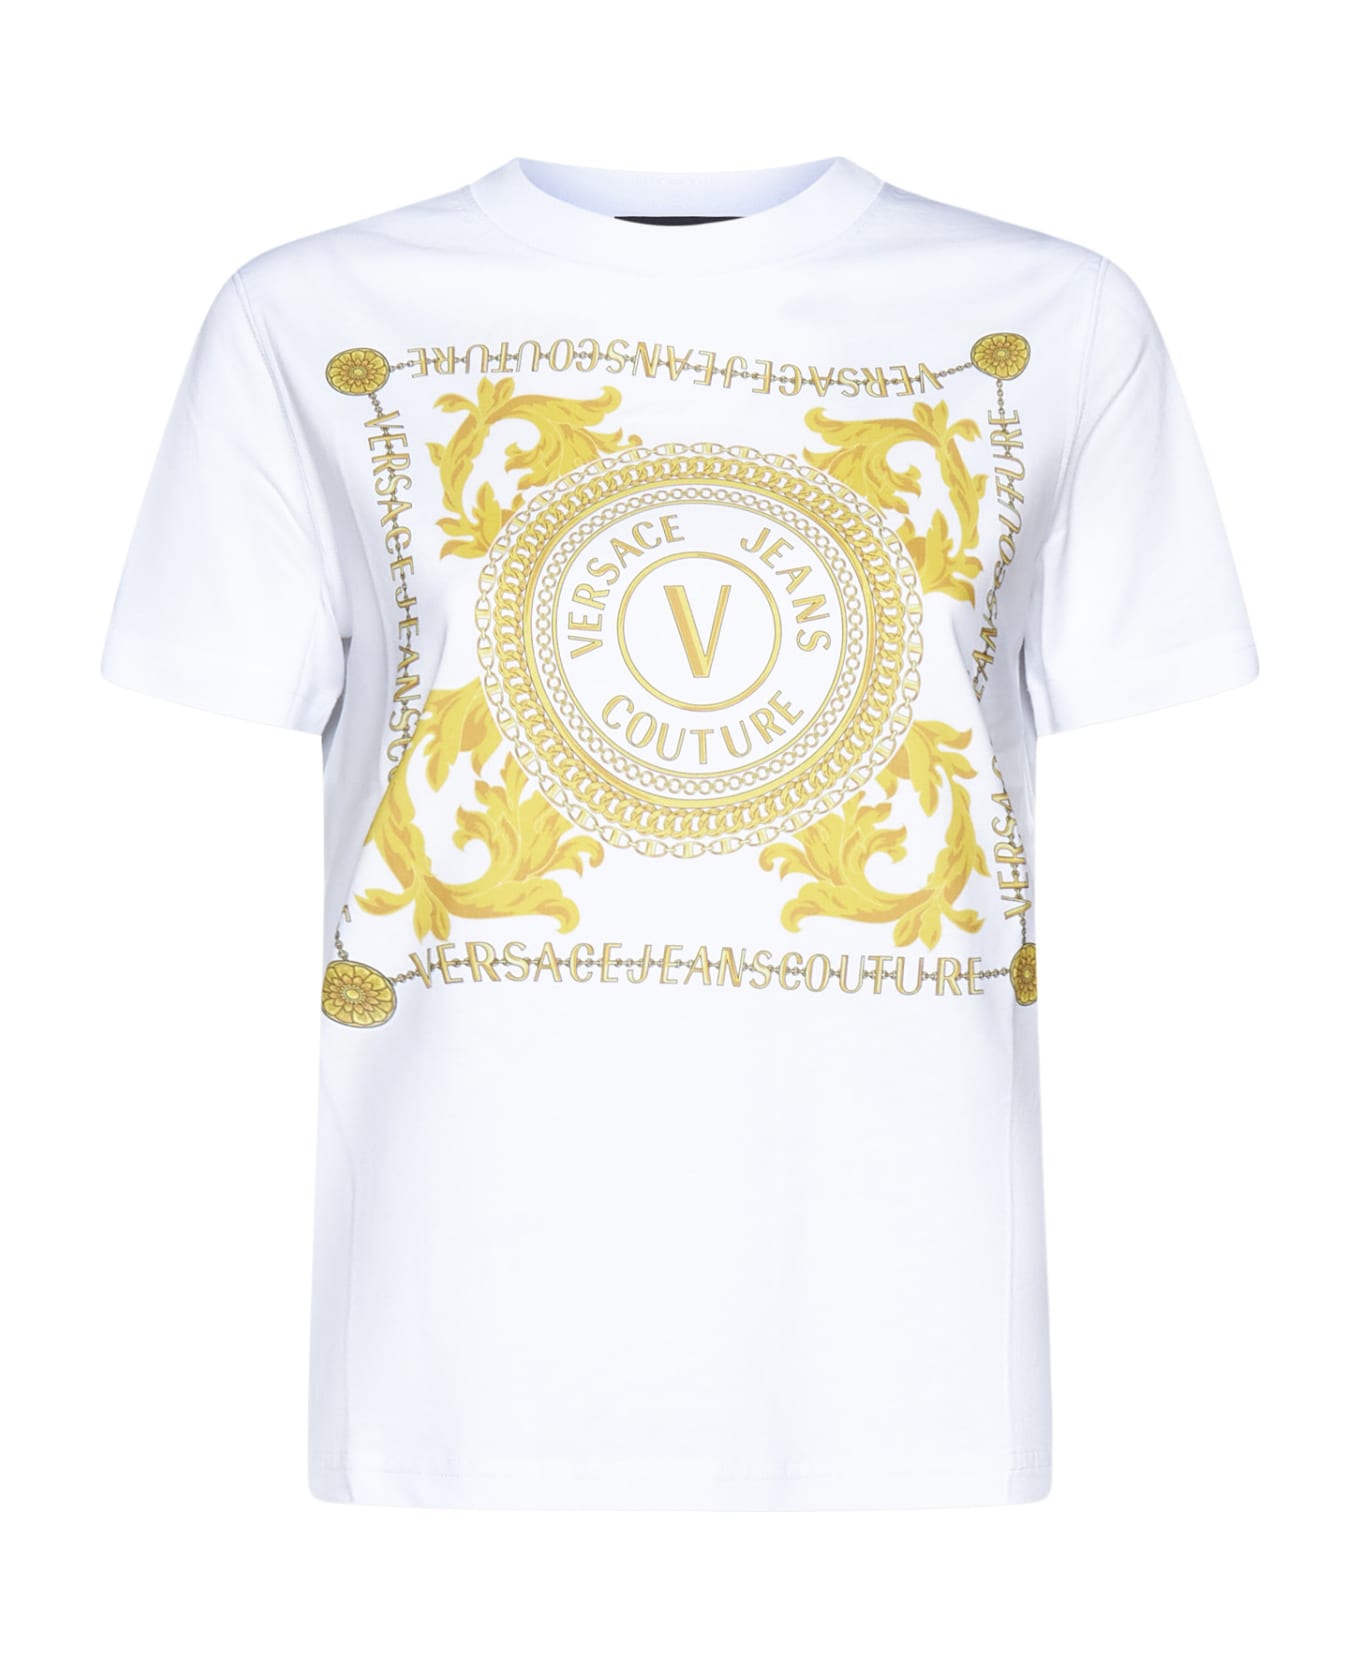 Versace Jeans Couture T-shirt - White/gold Tシャツ